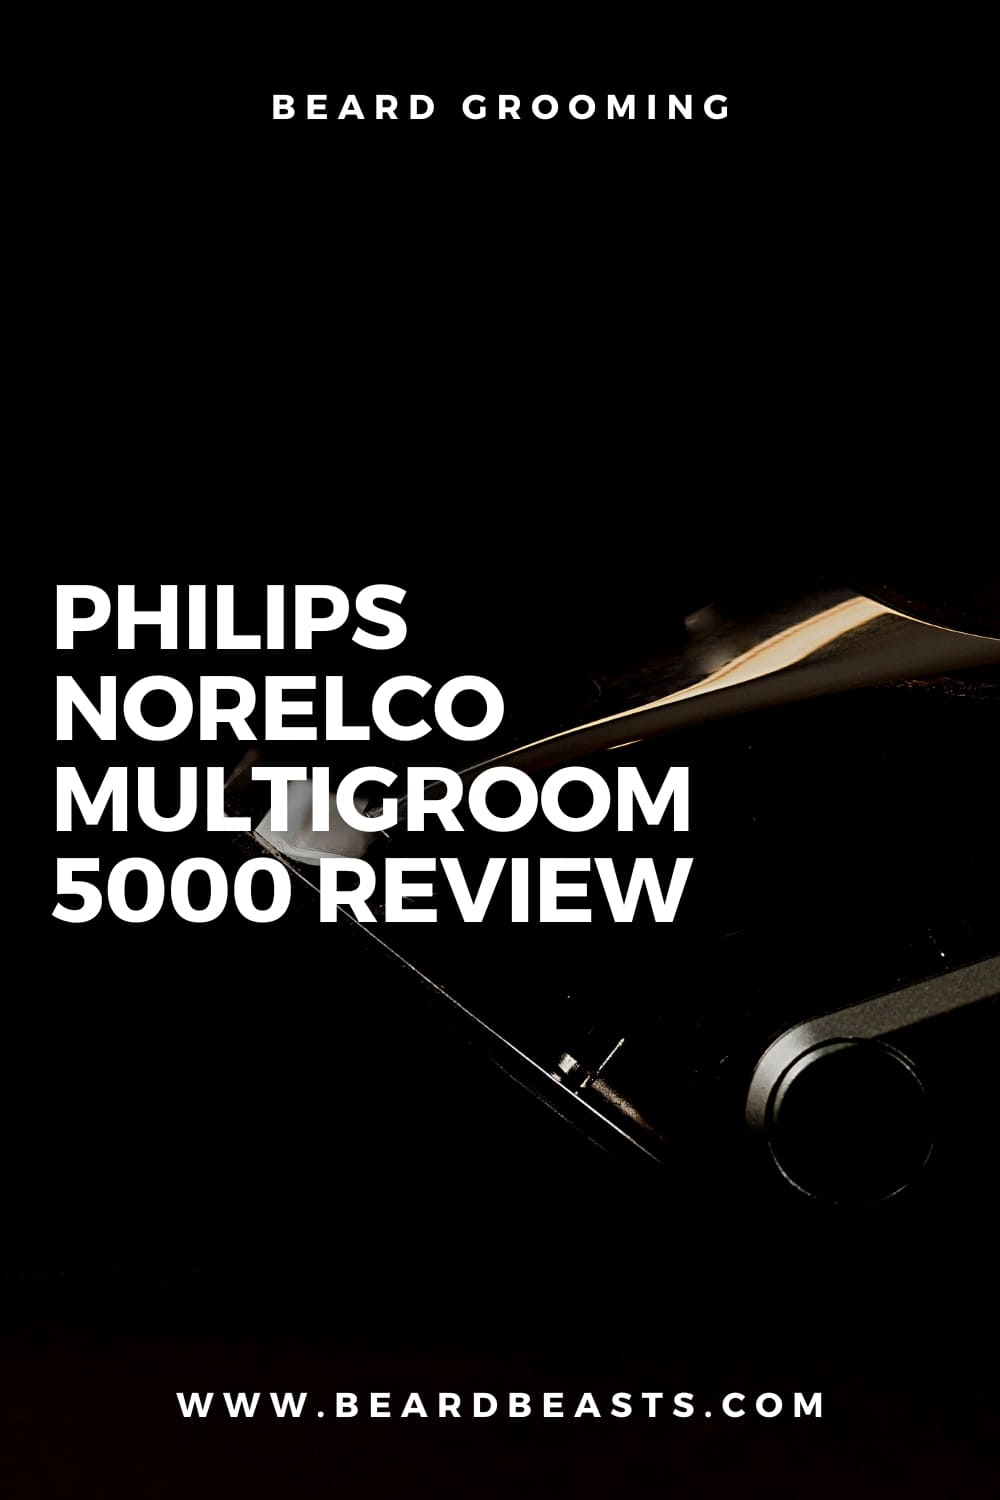 Promotional image featuring a close-up of the Philips Norelco Multigroom 5000 with the text 'Philips Norelco Multigroom 5000 Review' prominently displayed. The background is dark, highlighting the sleek design of the trimmer. Below the main text is the website 'WWW.BEARDBEASTS.COM' in smaller font, indicating the source of the review.